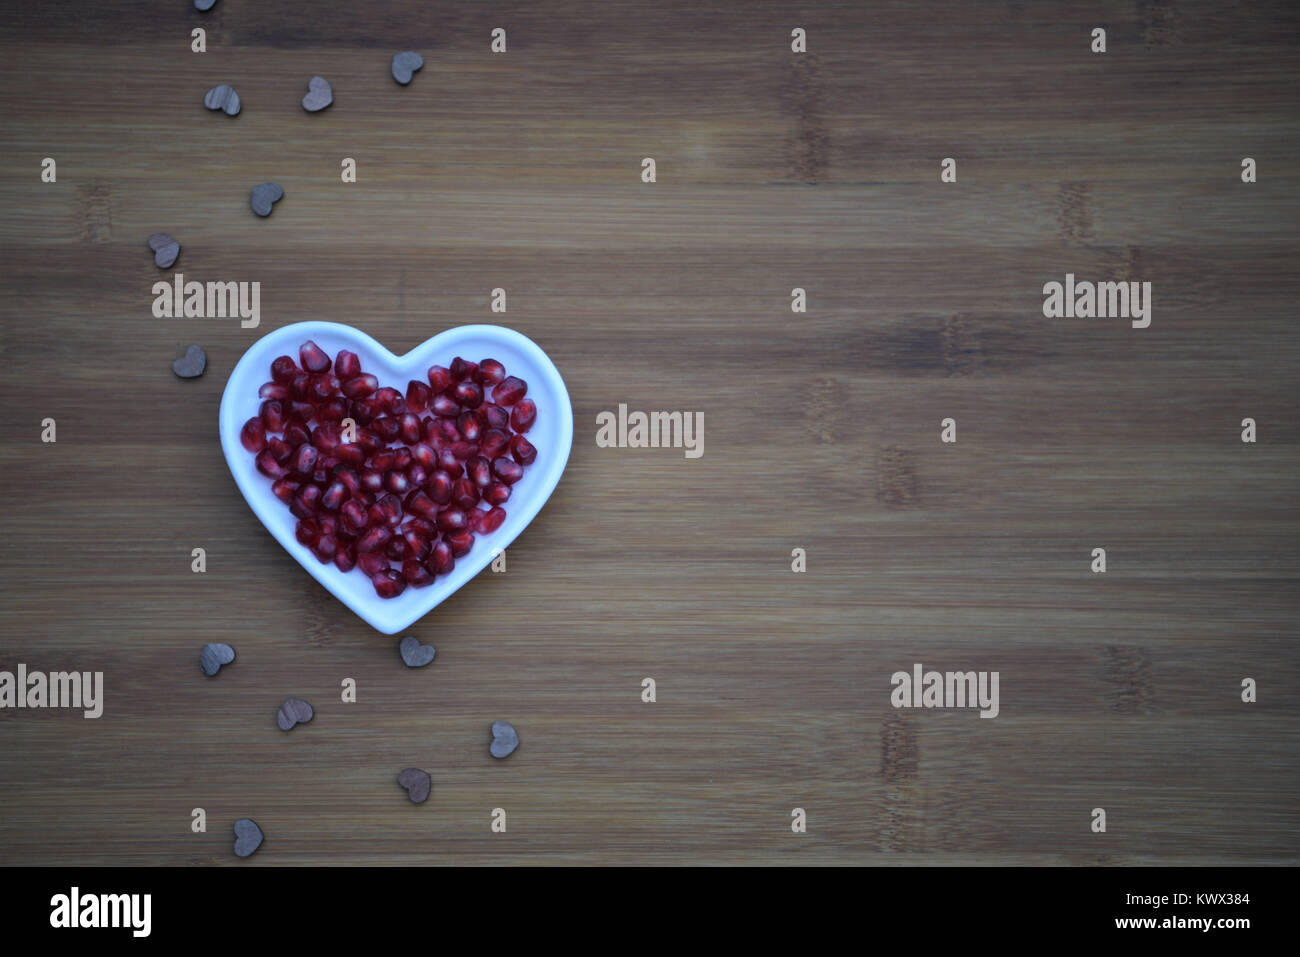 healthy food photography of red shiny juicy shiny pomegranate seeds in white heart shape dish with love heart decorations on wood background and space Stock Photo